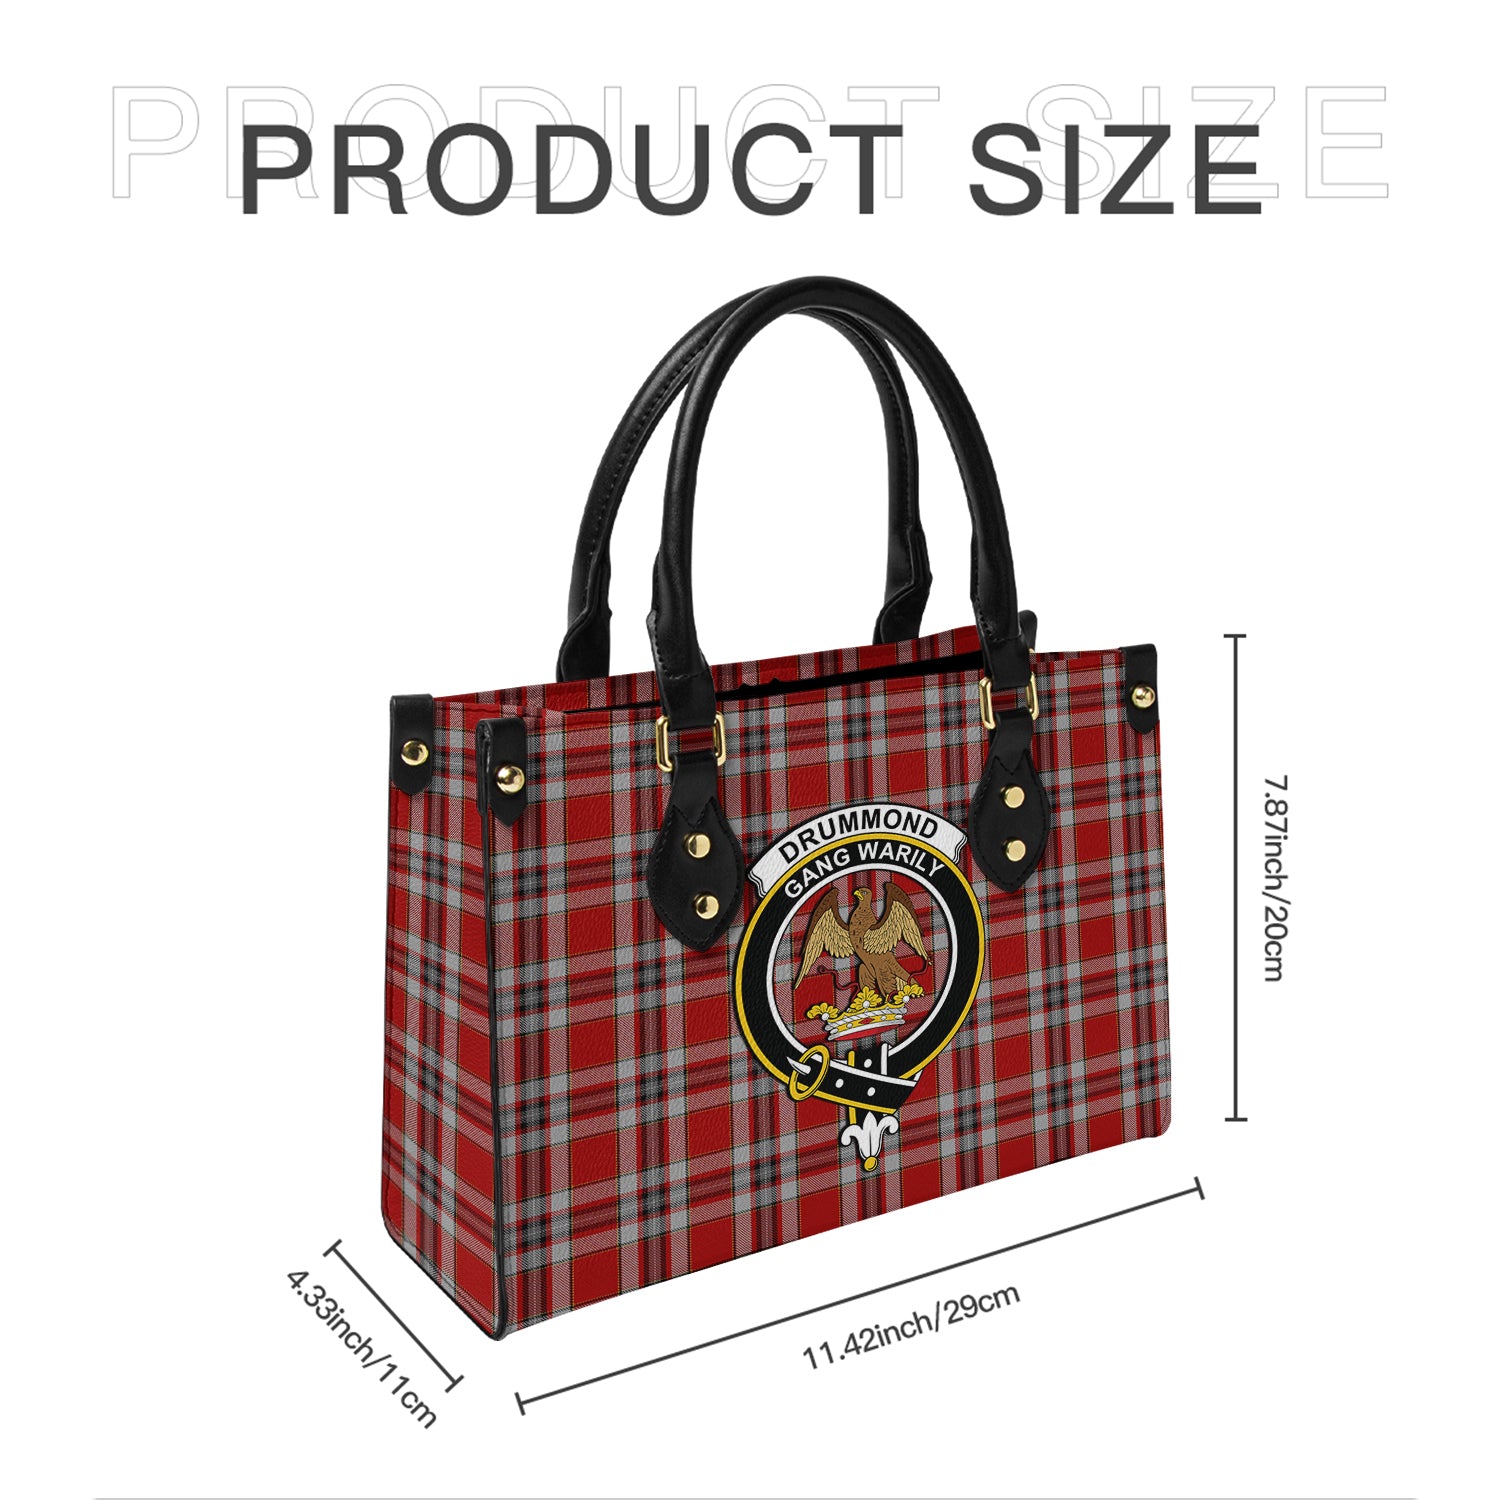 drummond-of-perth-dress-tartan-leather-bag-with-family-crest